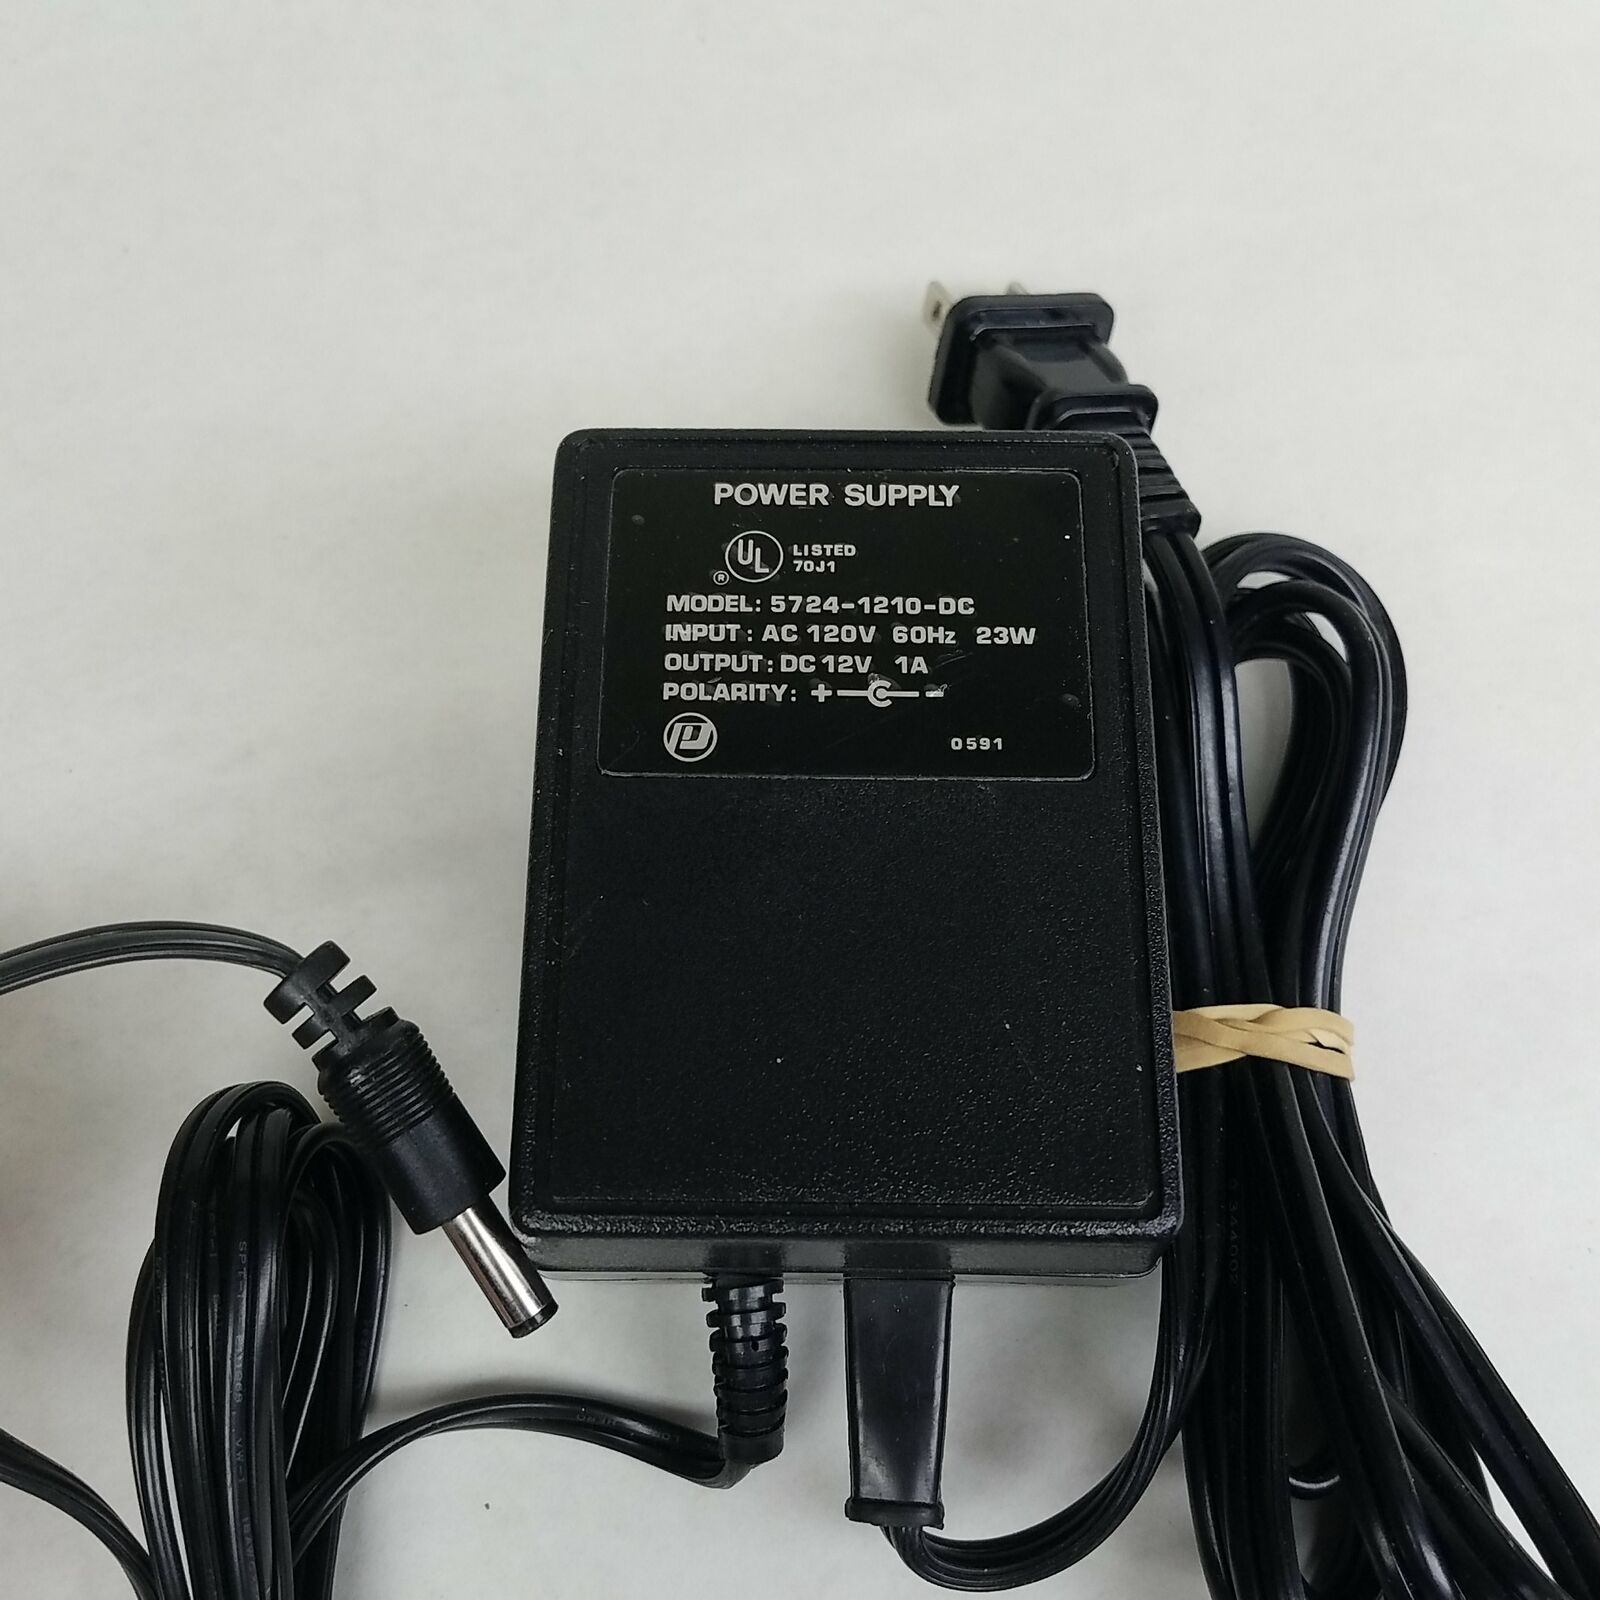 NEW 12VDC 1A AC Power Supply 5724-1210-DC Charger Adapter